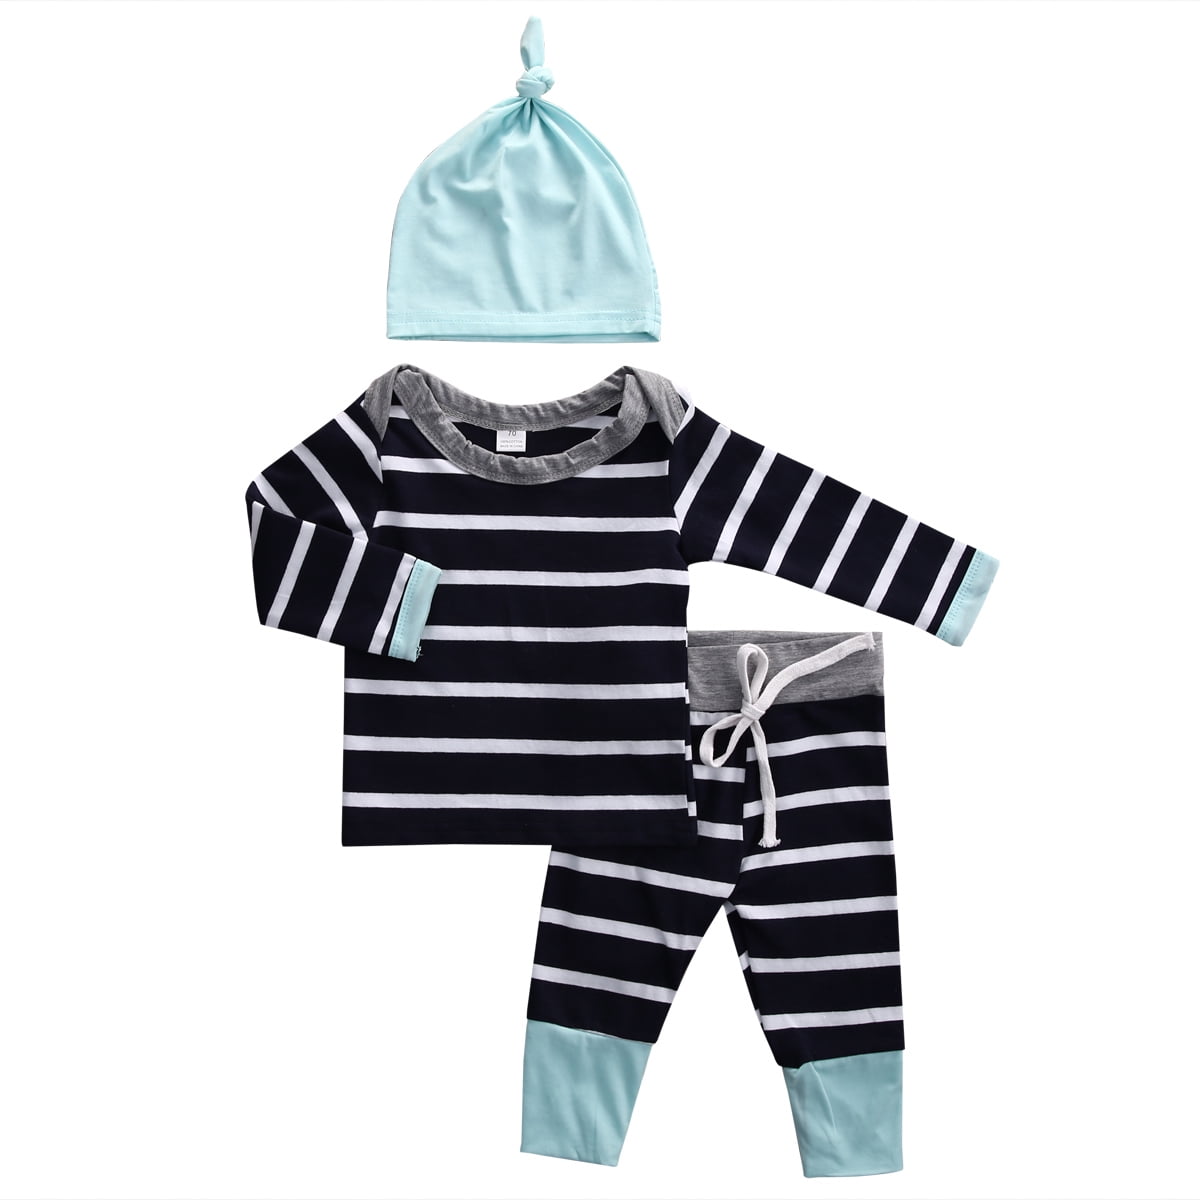 Newborn Baby Kids Boys Girls Hooded Shirt Tops+Pants Outfits Striped Clothes Set 